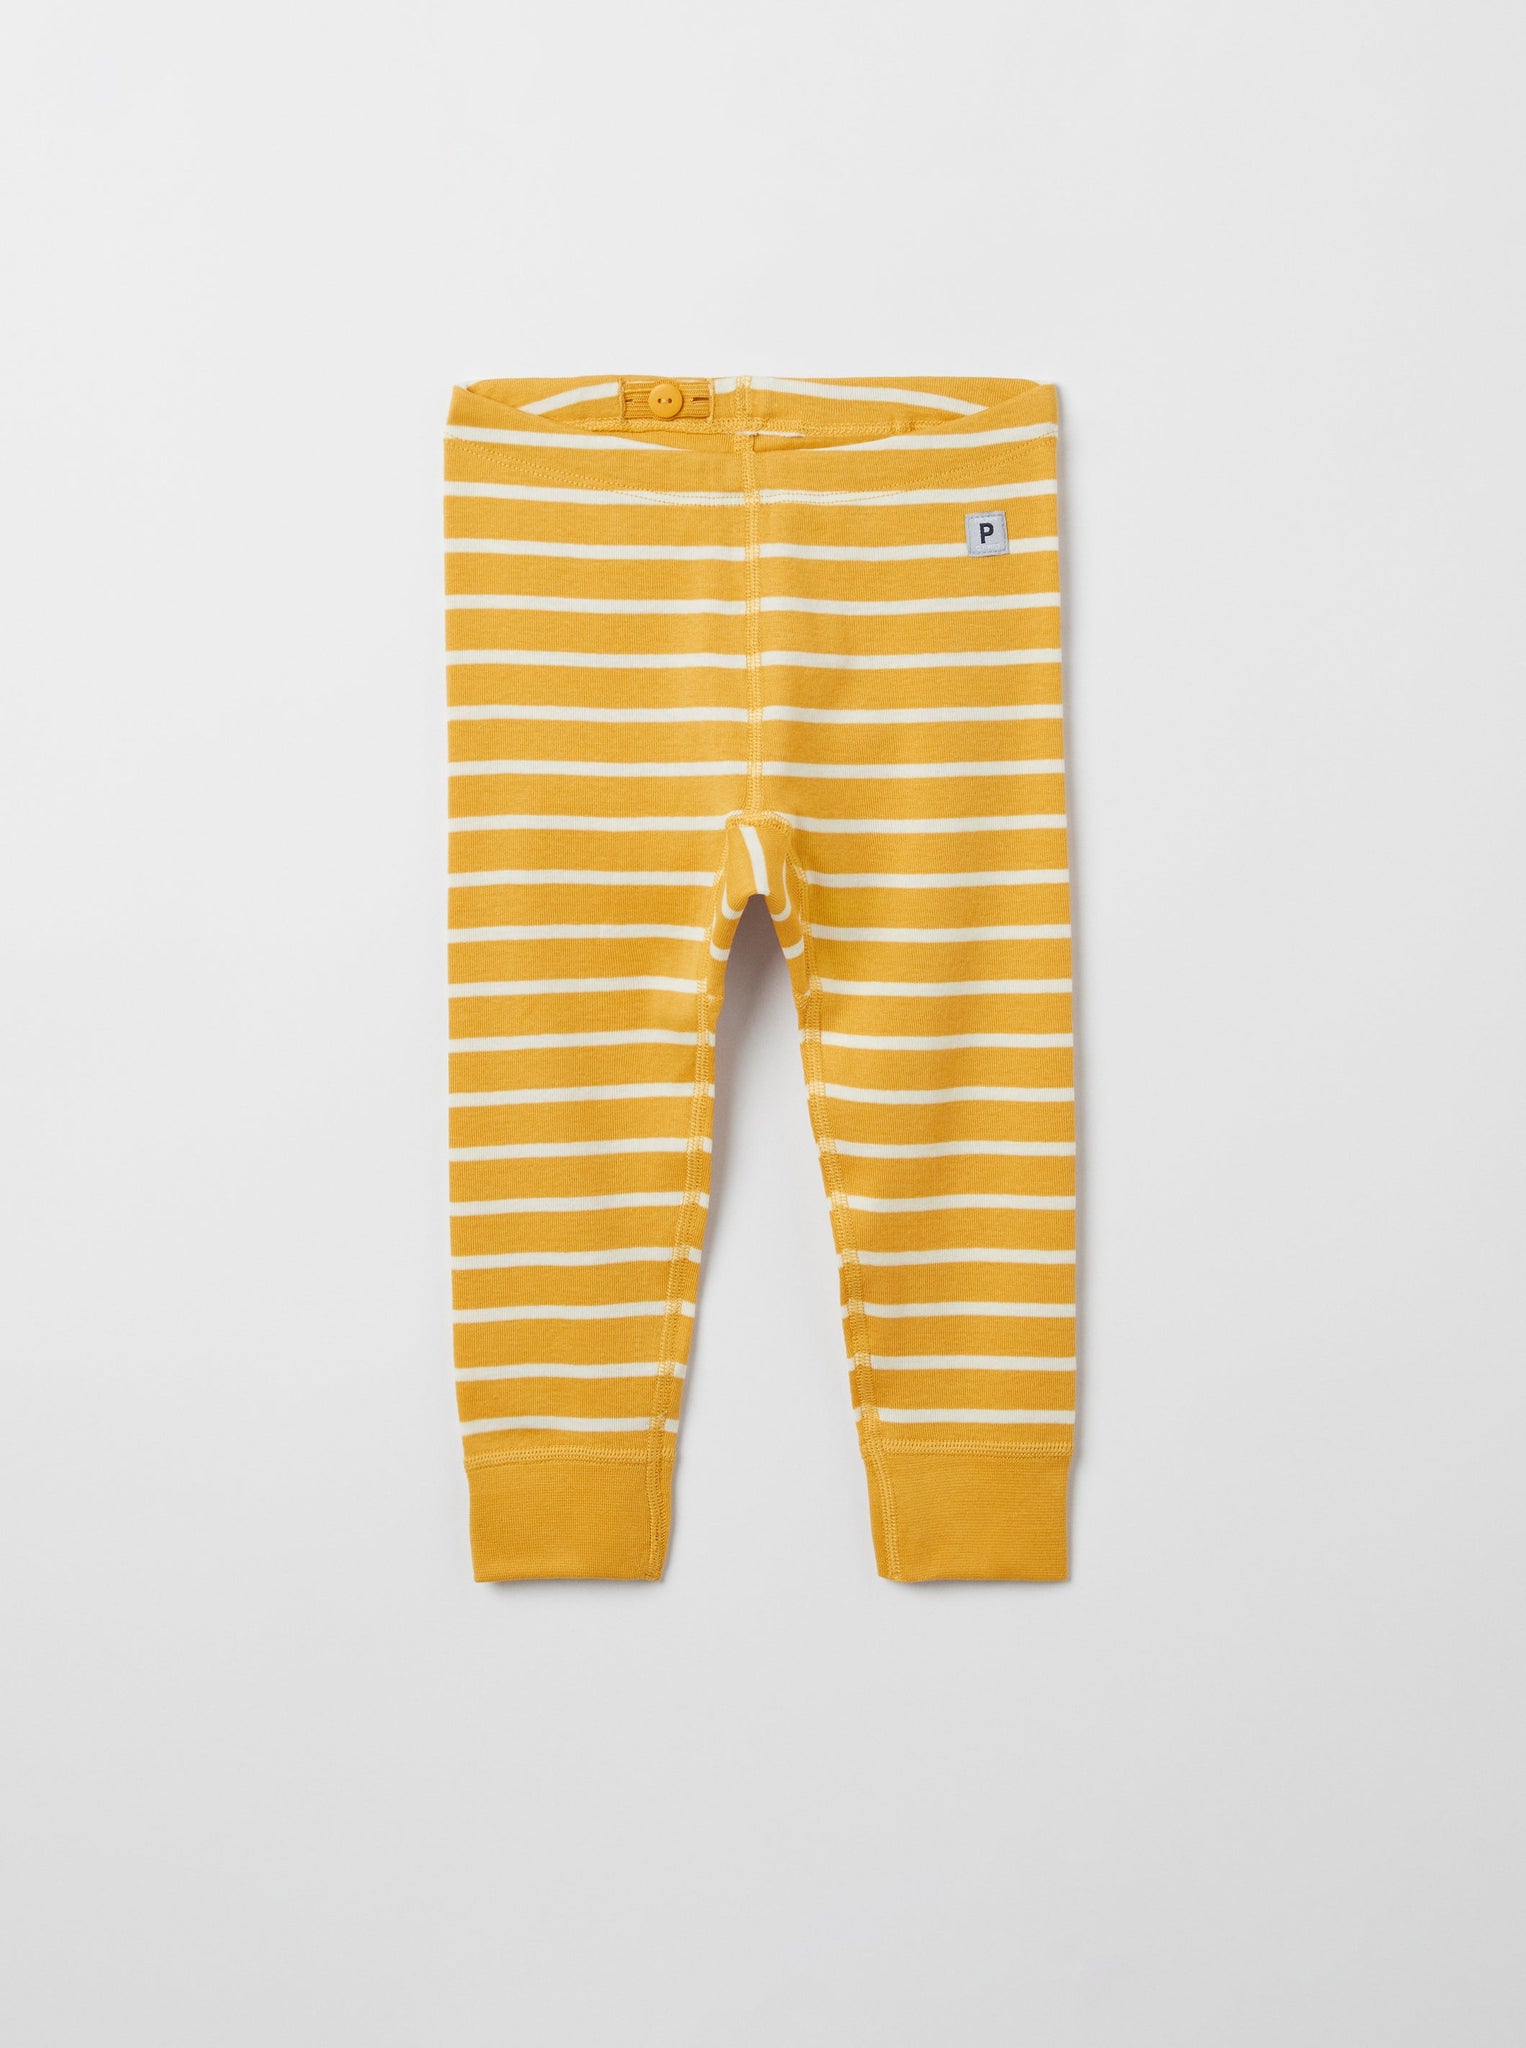 Organic Cotton Yellow Baby Leggings from the Polarn O. Pyret babywear collection. Clothes made using sustainably sourced materials.